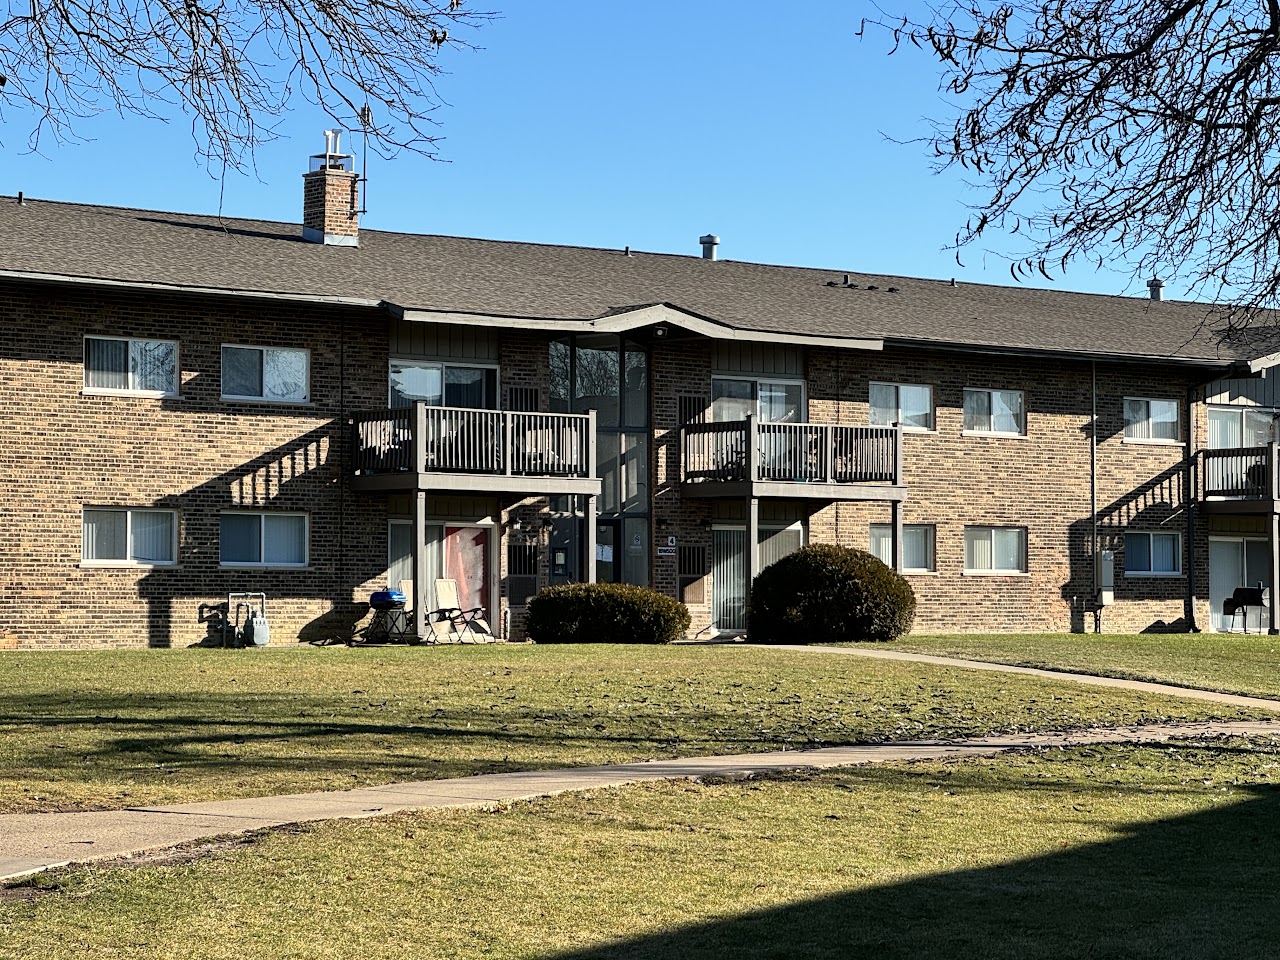 Photo of HINSDALE LAKE TERRACE. Affordable housing located at 450 HONEYSUCKLE ROSE RD WILLOWBROOK, IL 